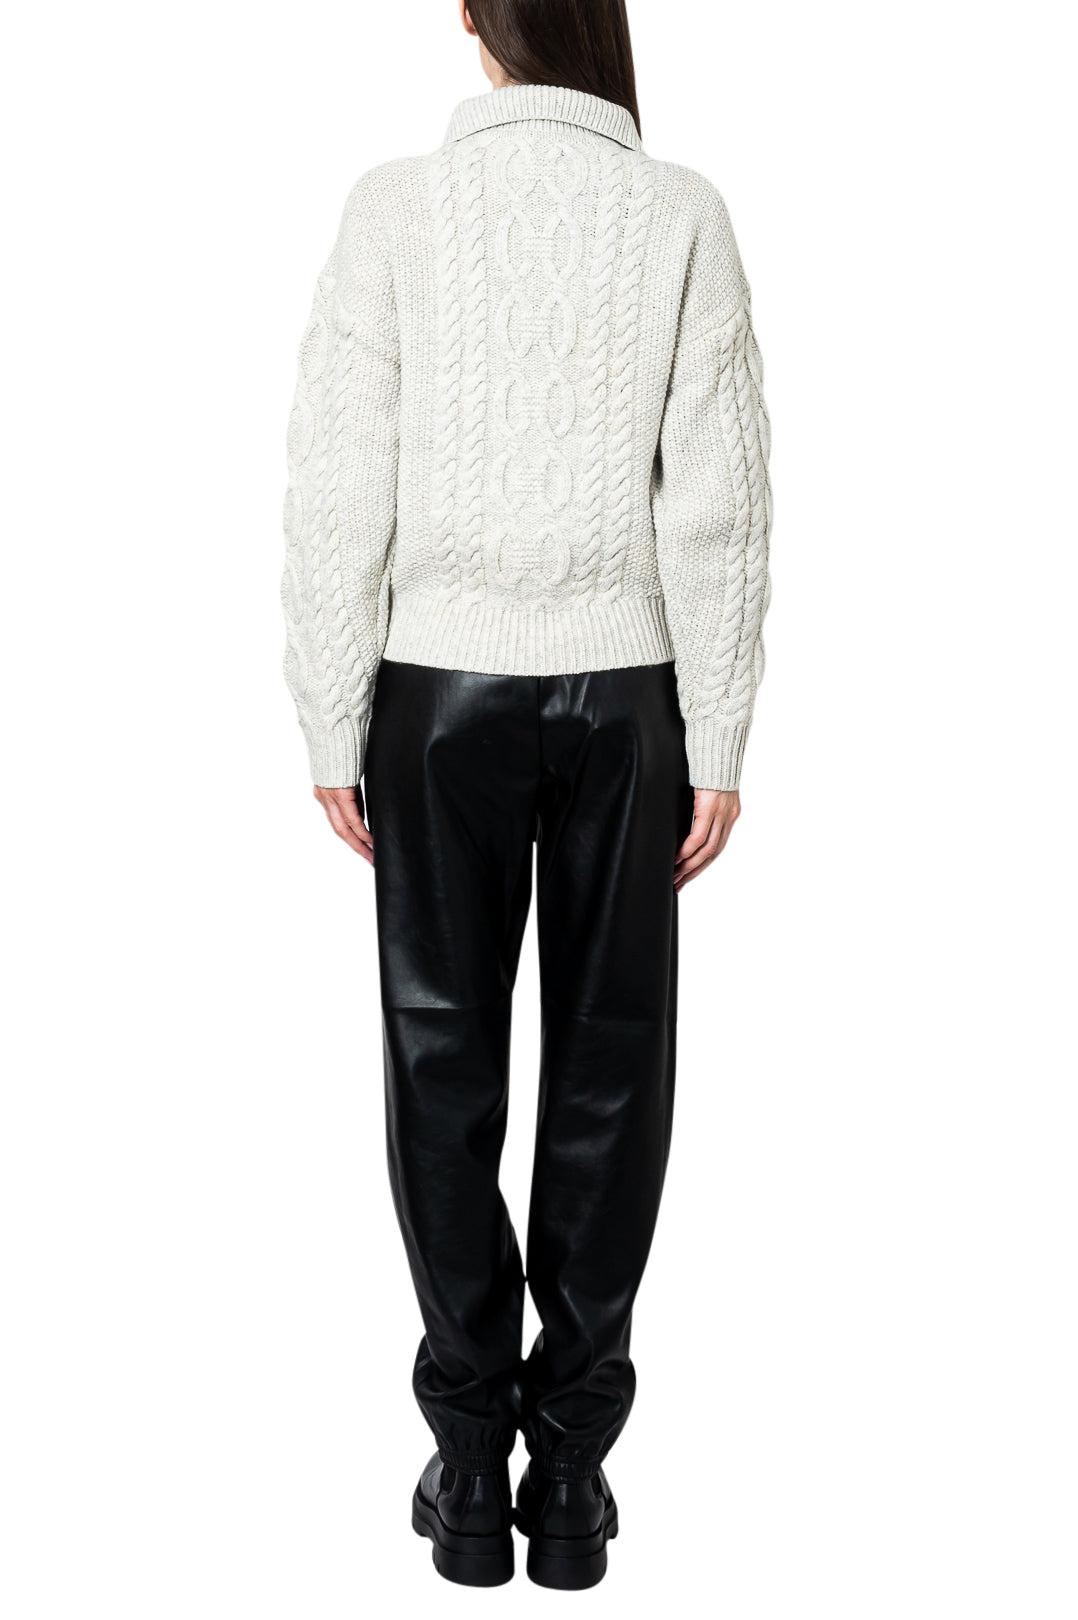 The Garment-Knit cable turtleneck sweater-18422-dgallerystore